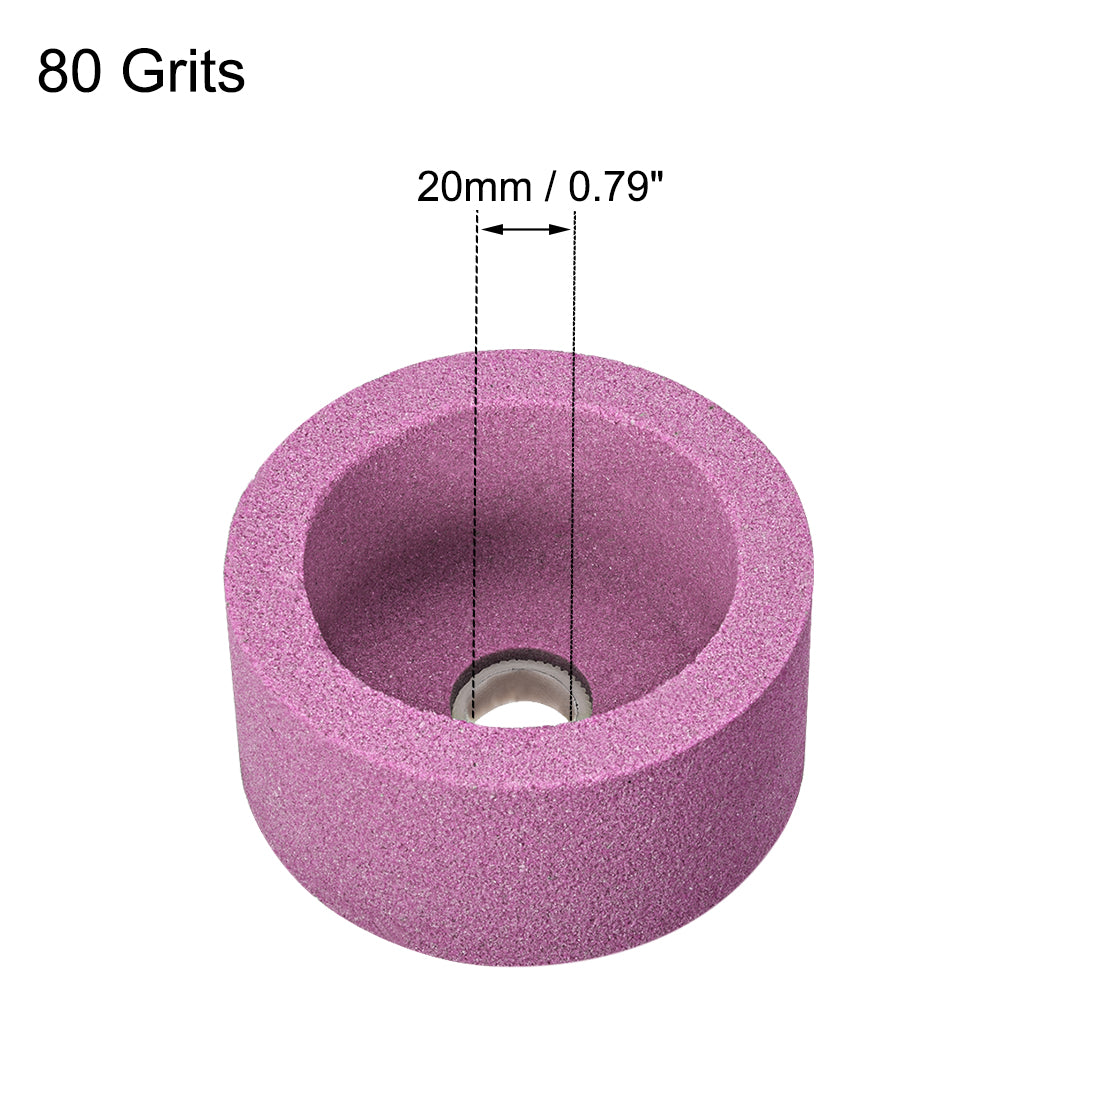 uxcell Uxcell 4-Inch Cup Grinding Wheel 80 Grits Pink Aluminum Oxide PA Abrasive Wheels